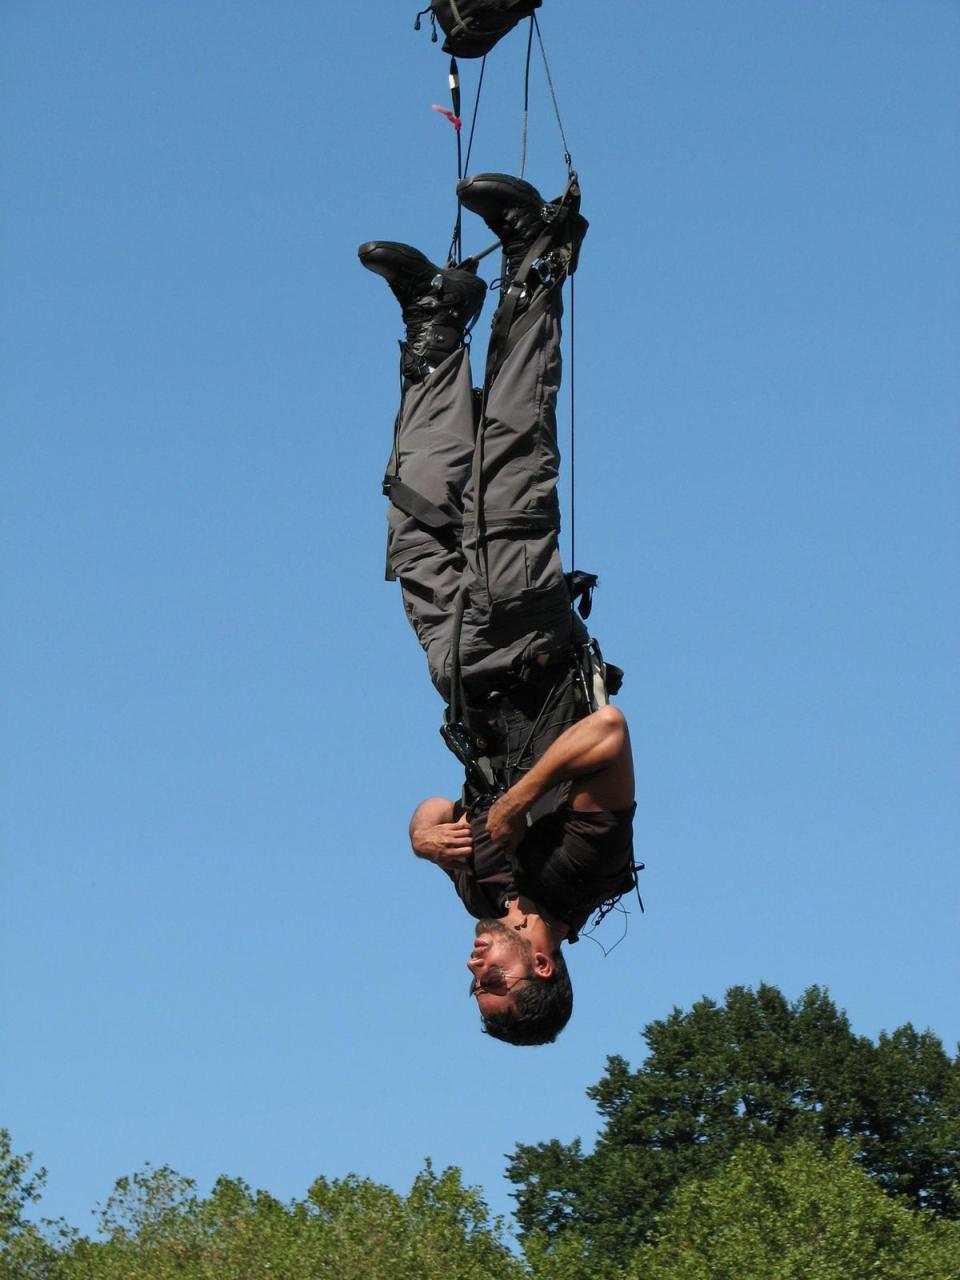 Blaine, attempting to hang upside down for 60 hours in New York's Central Park, is notorious for his dangerous stunts (PA)